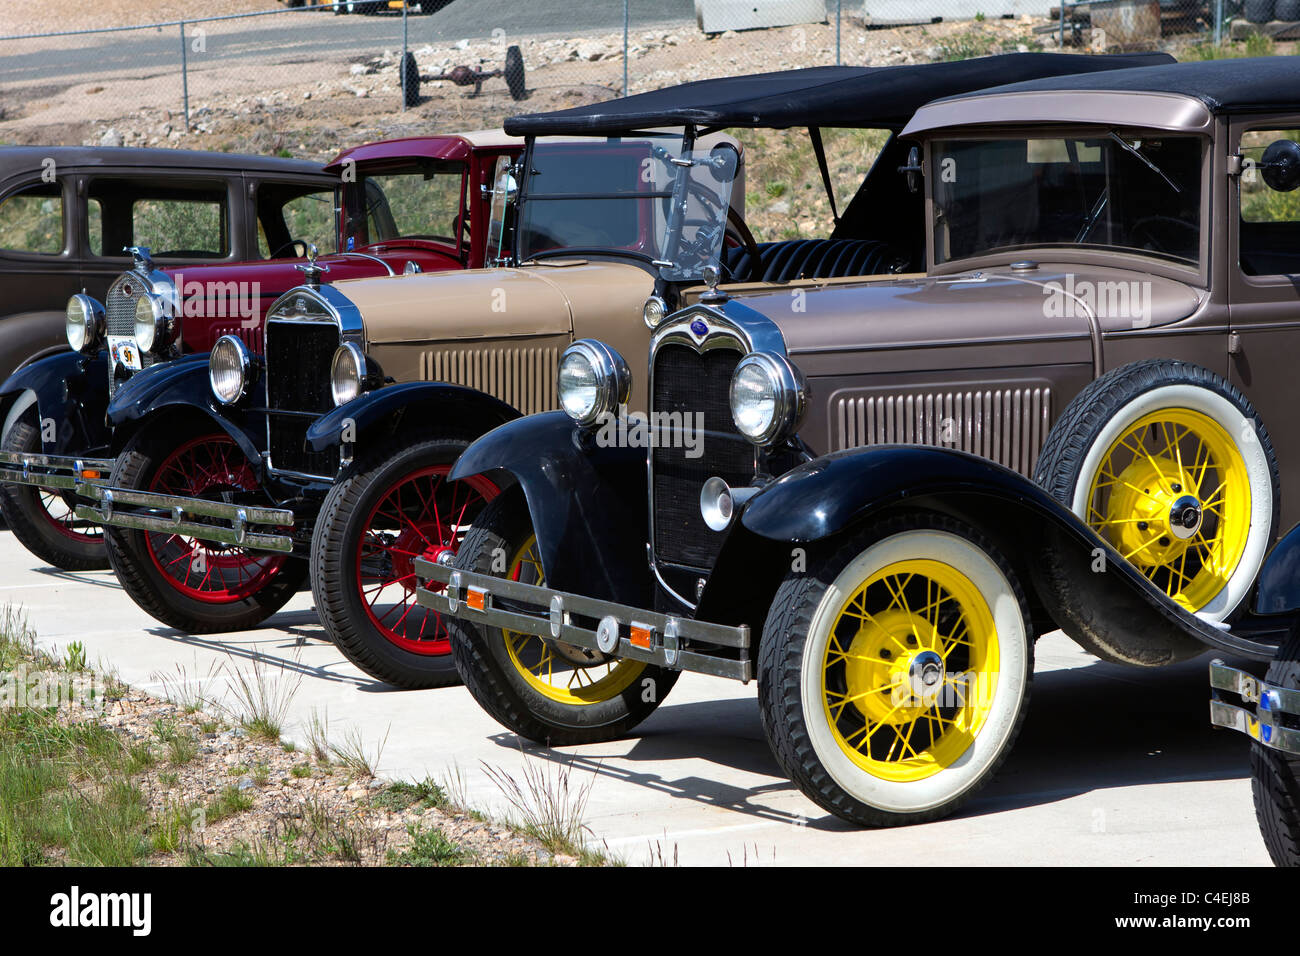 Estes Park, Colorado - A row of Model A Ford automobiles produced between 1927 and 1931 line a parking lot. Stock Photo